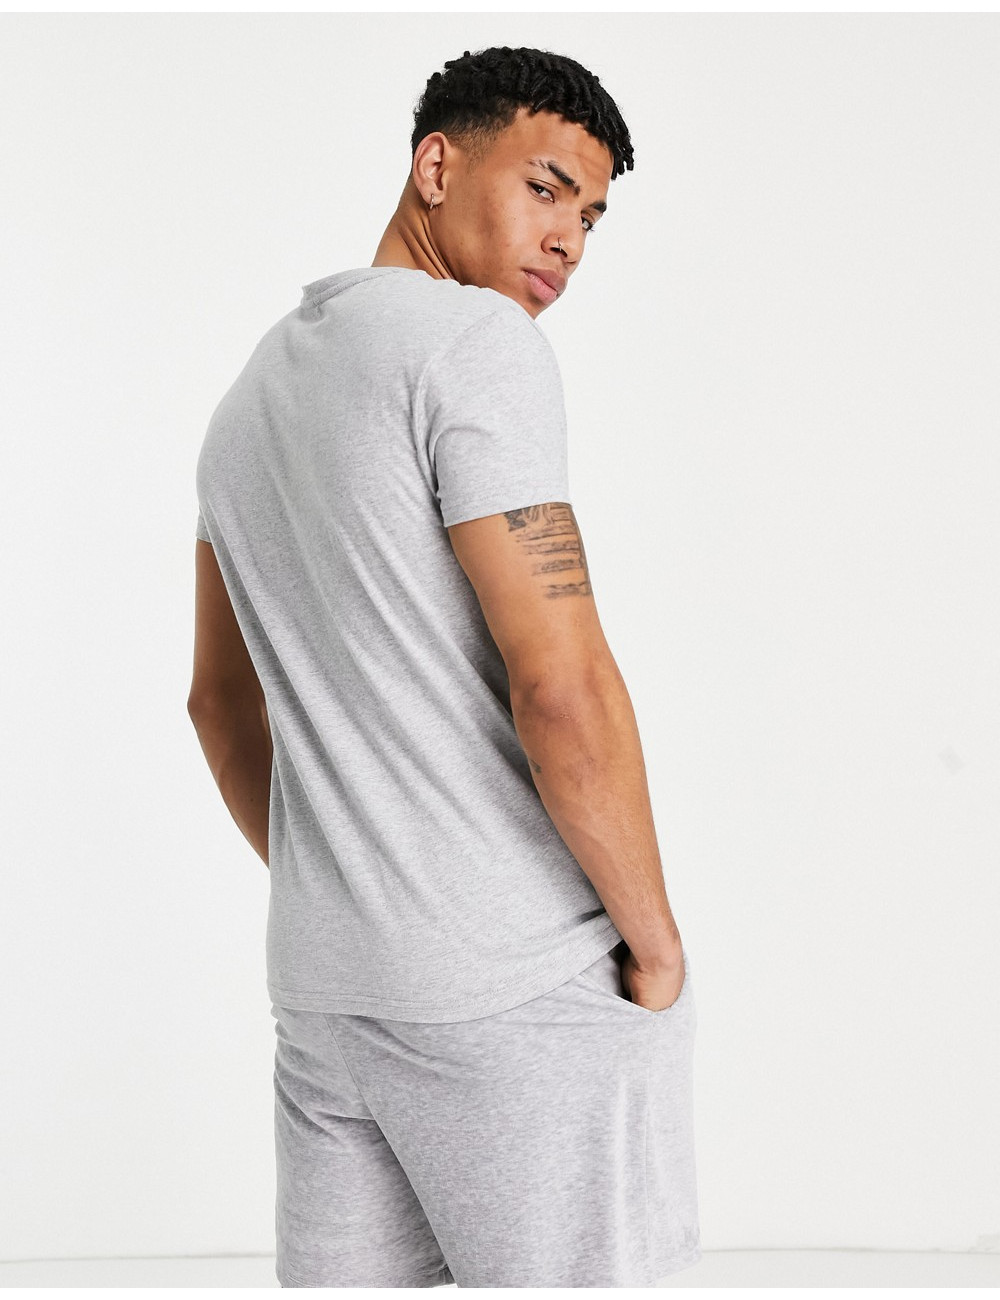 GANT t-shirt in grey with...